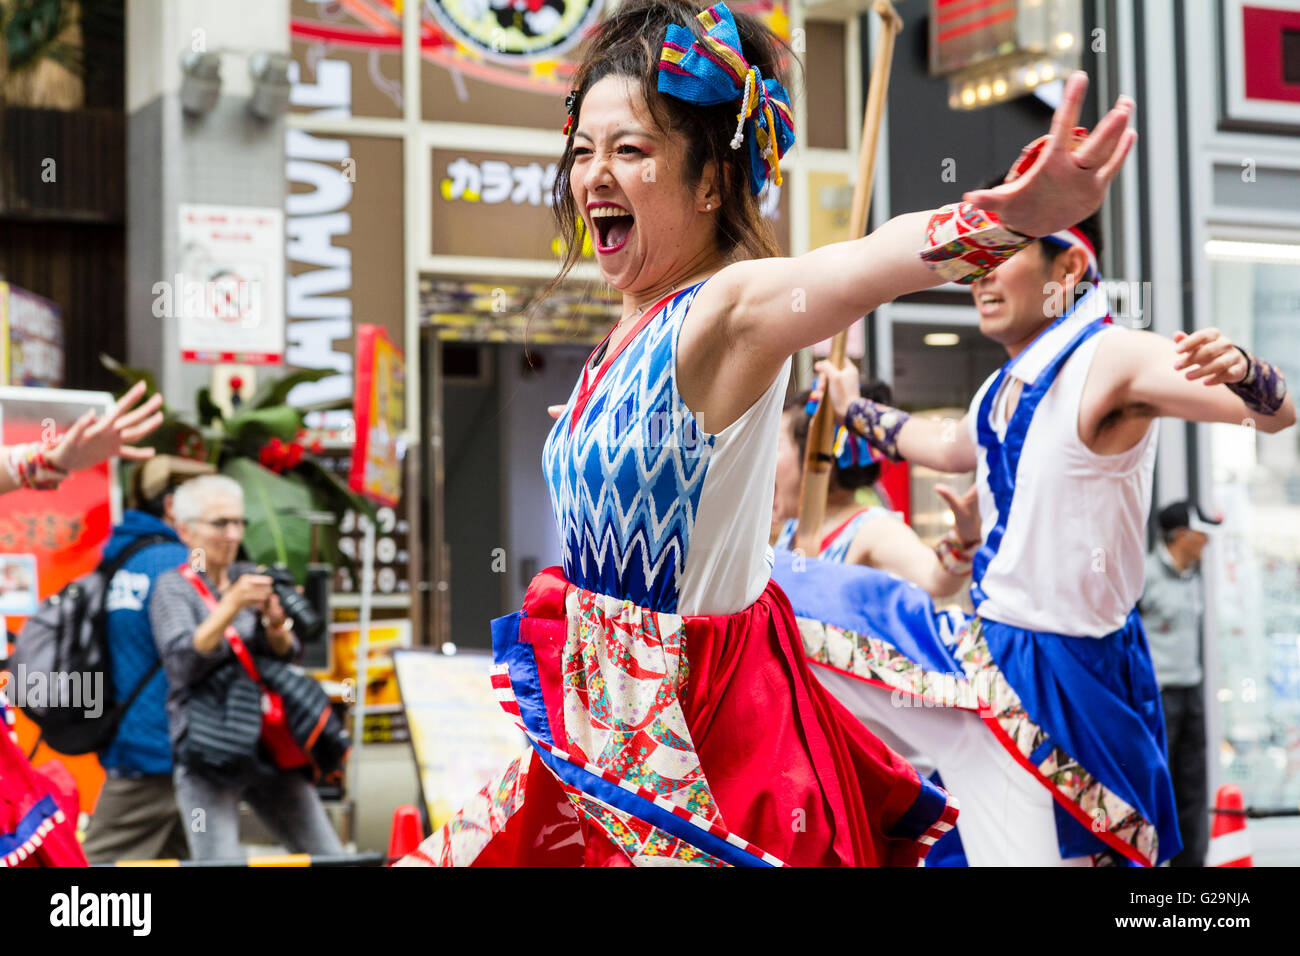 Japan, Kumamoto. Hinokuni Yosakoi dance festival. Close up of Japanese young woman dancer, part of a team, arms outstretched, dancing in mall. Stock Photo